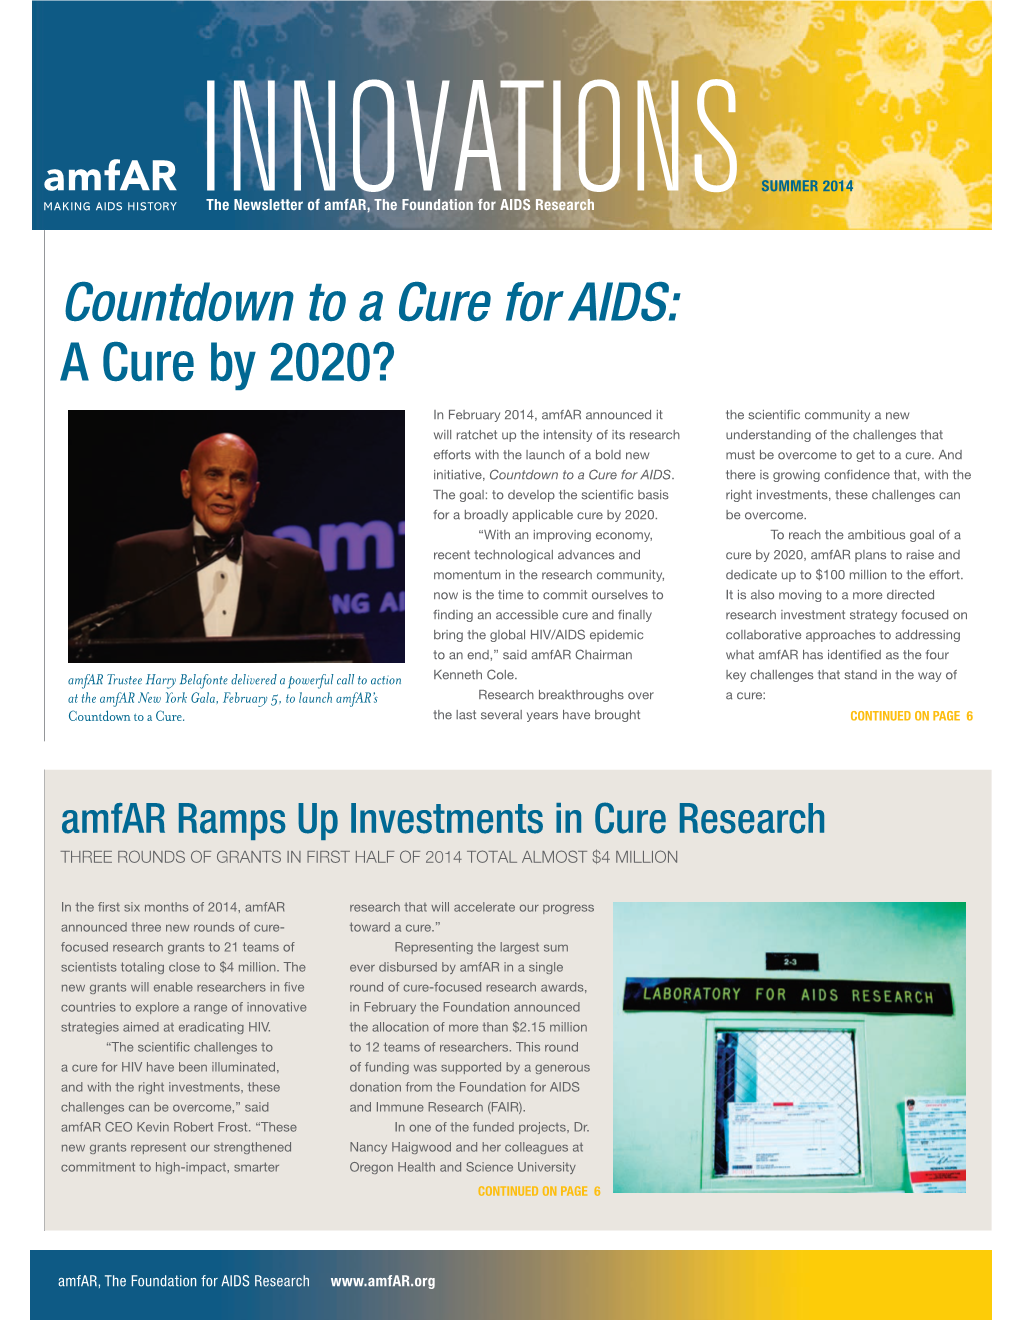 A Cure by 2020?